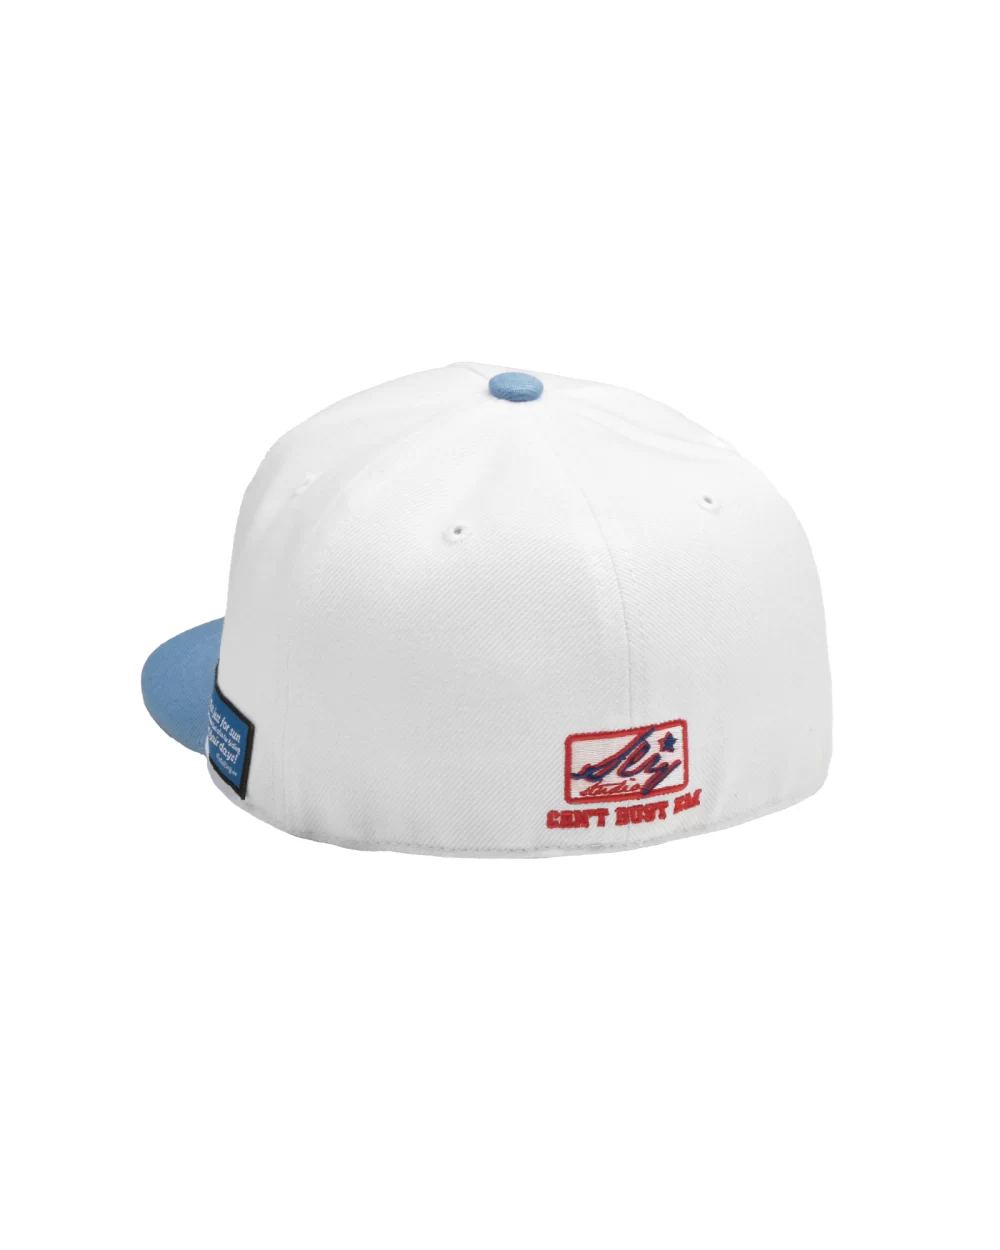 Blue White S Crews Fitted Hat 8